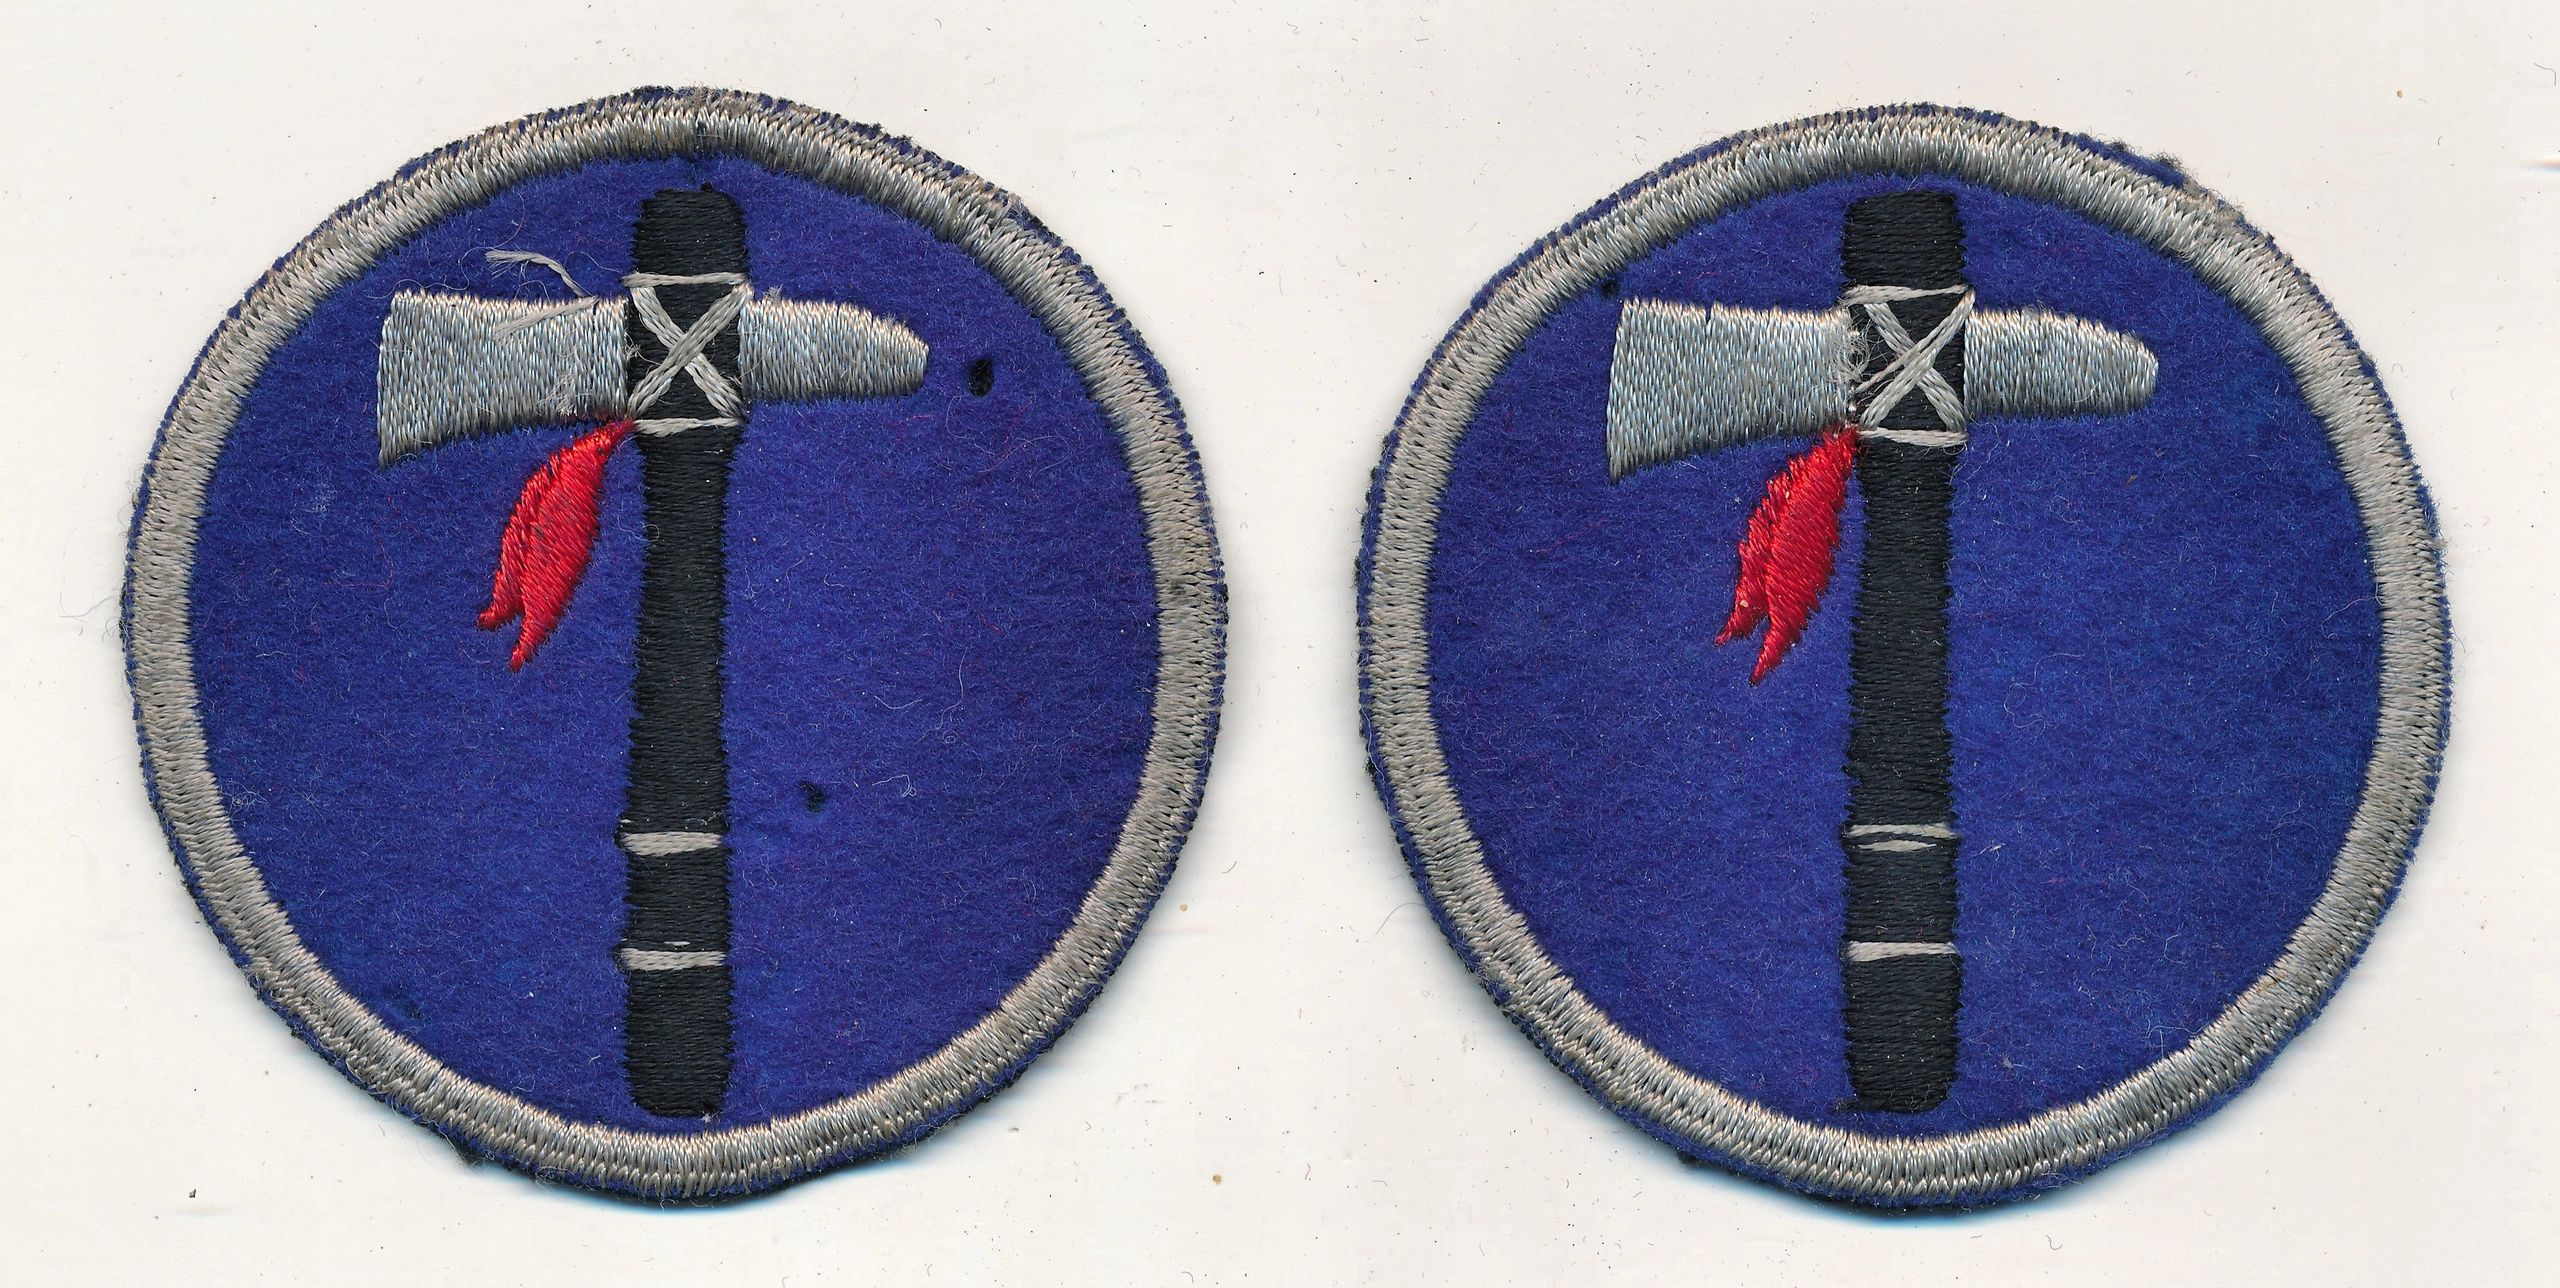 SOLD - Pair of Theater Made XIX Corps Insignia